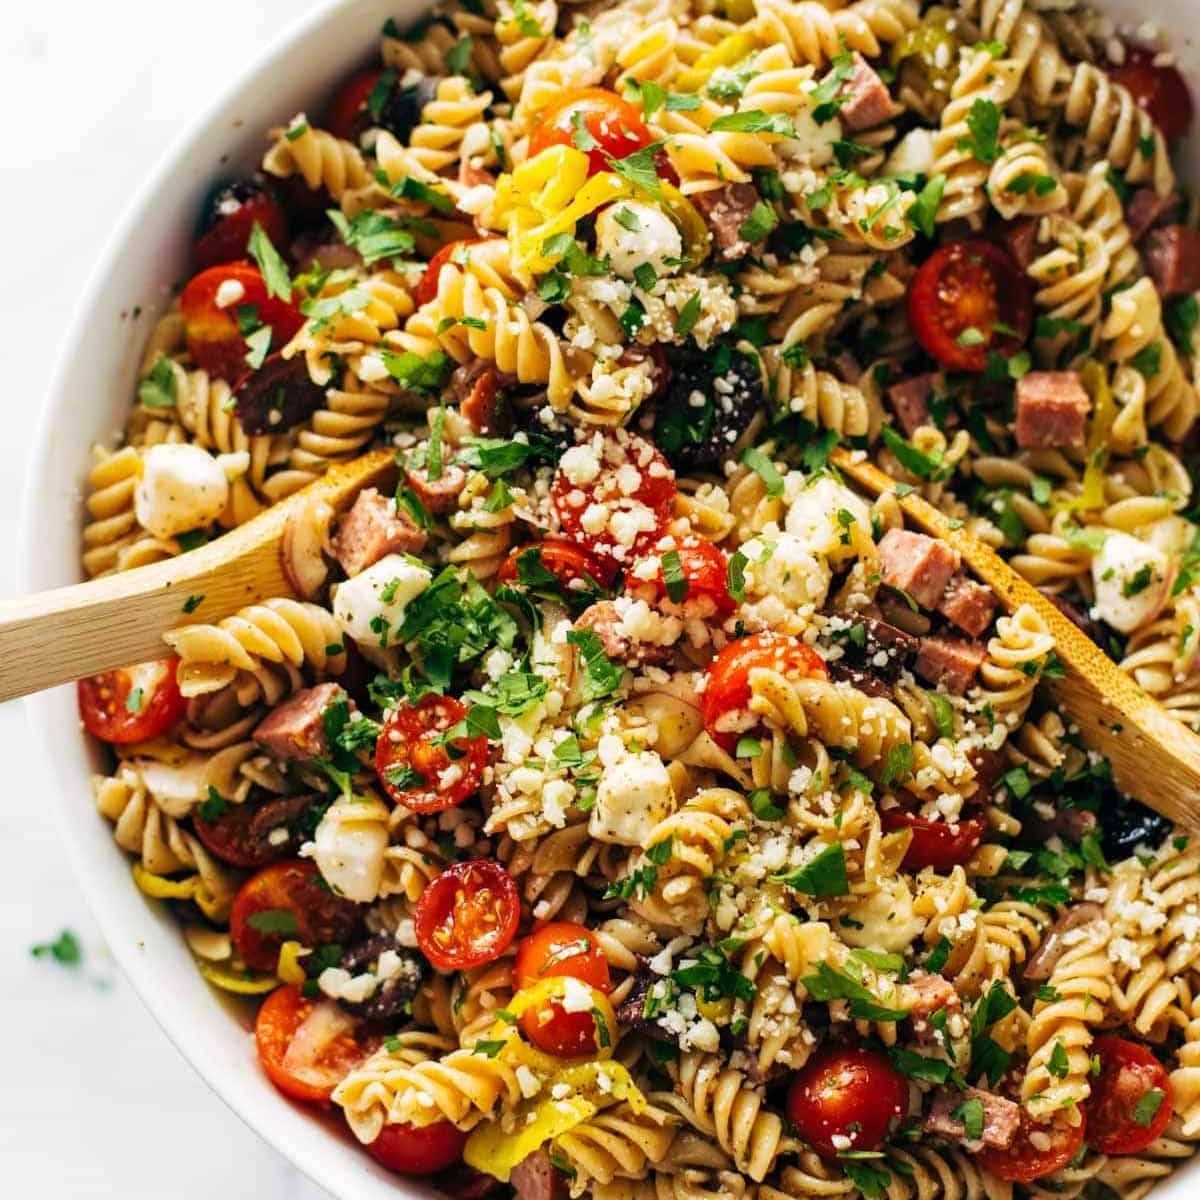 The Best Easy Italian Pasta Salad Recipe Pinch Of Yum,Things You Need For A Housewarming Party